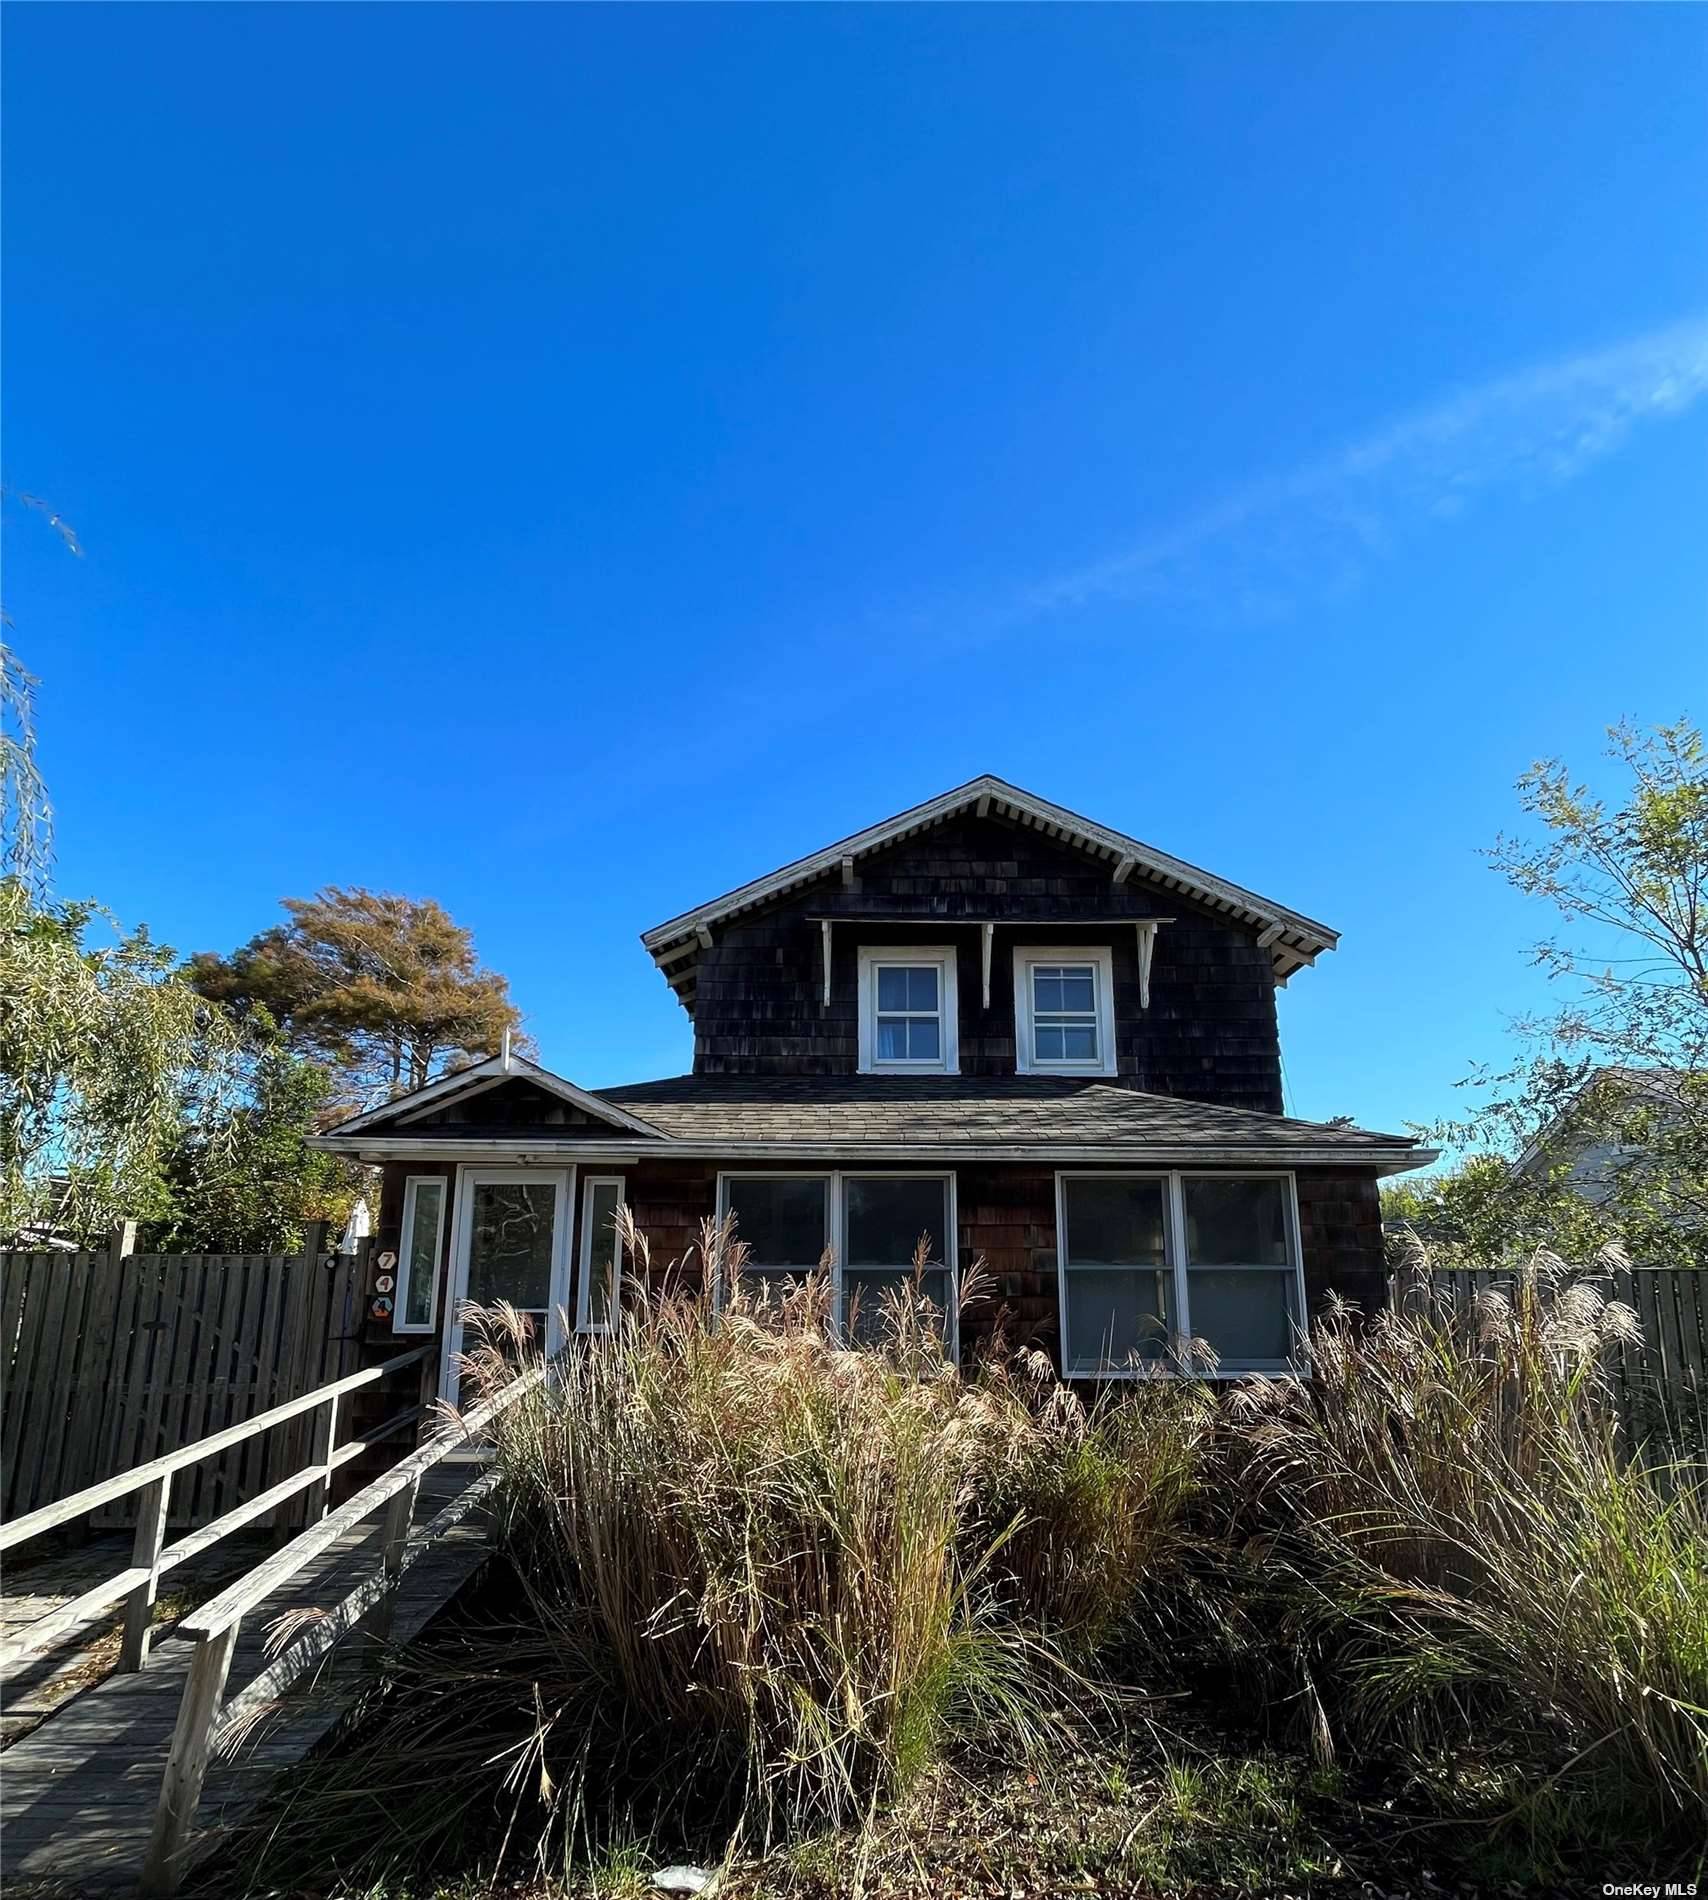 This Classic Fire Island Home In A Great Location Has Spacious 3 Bedrooms With 1.